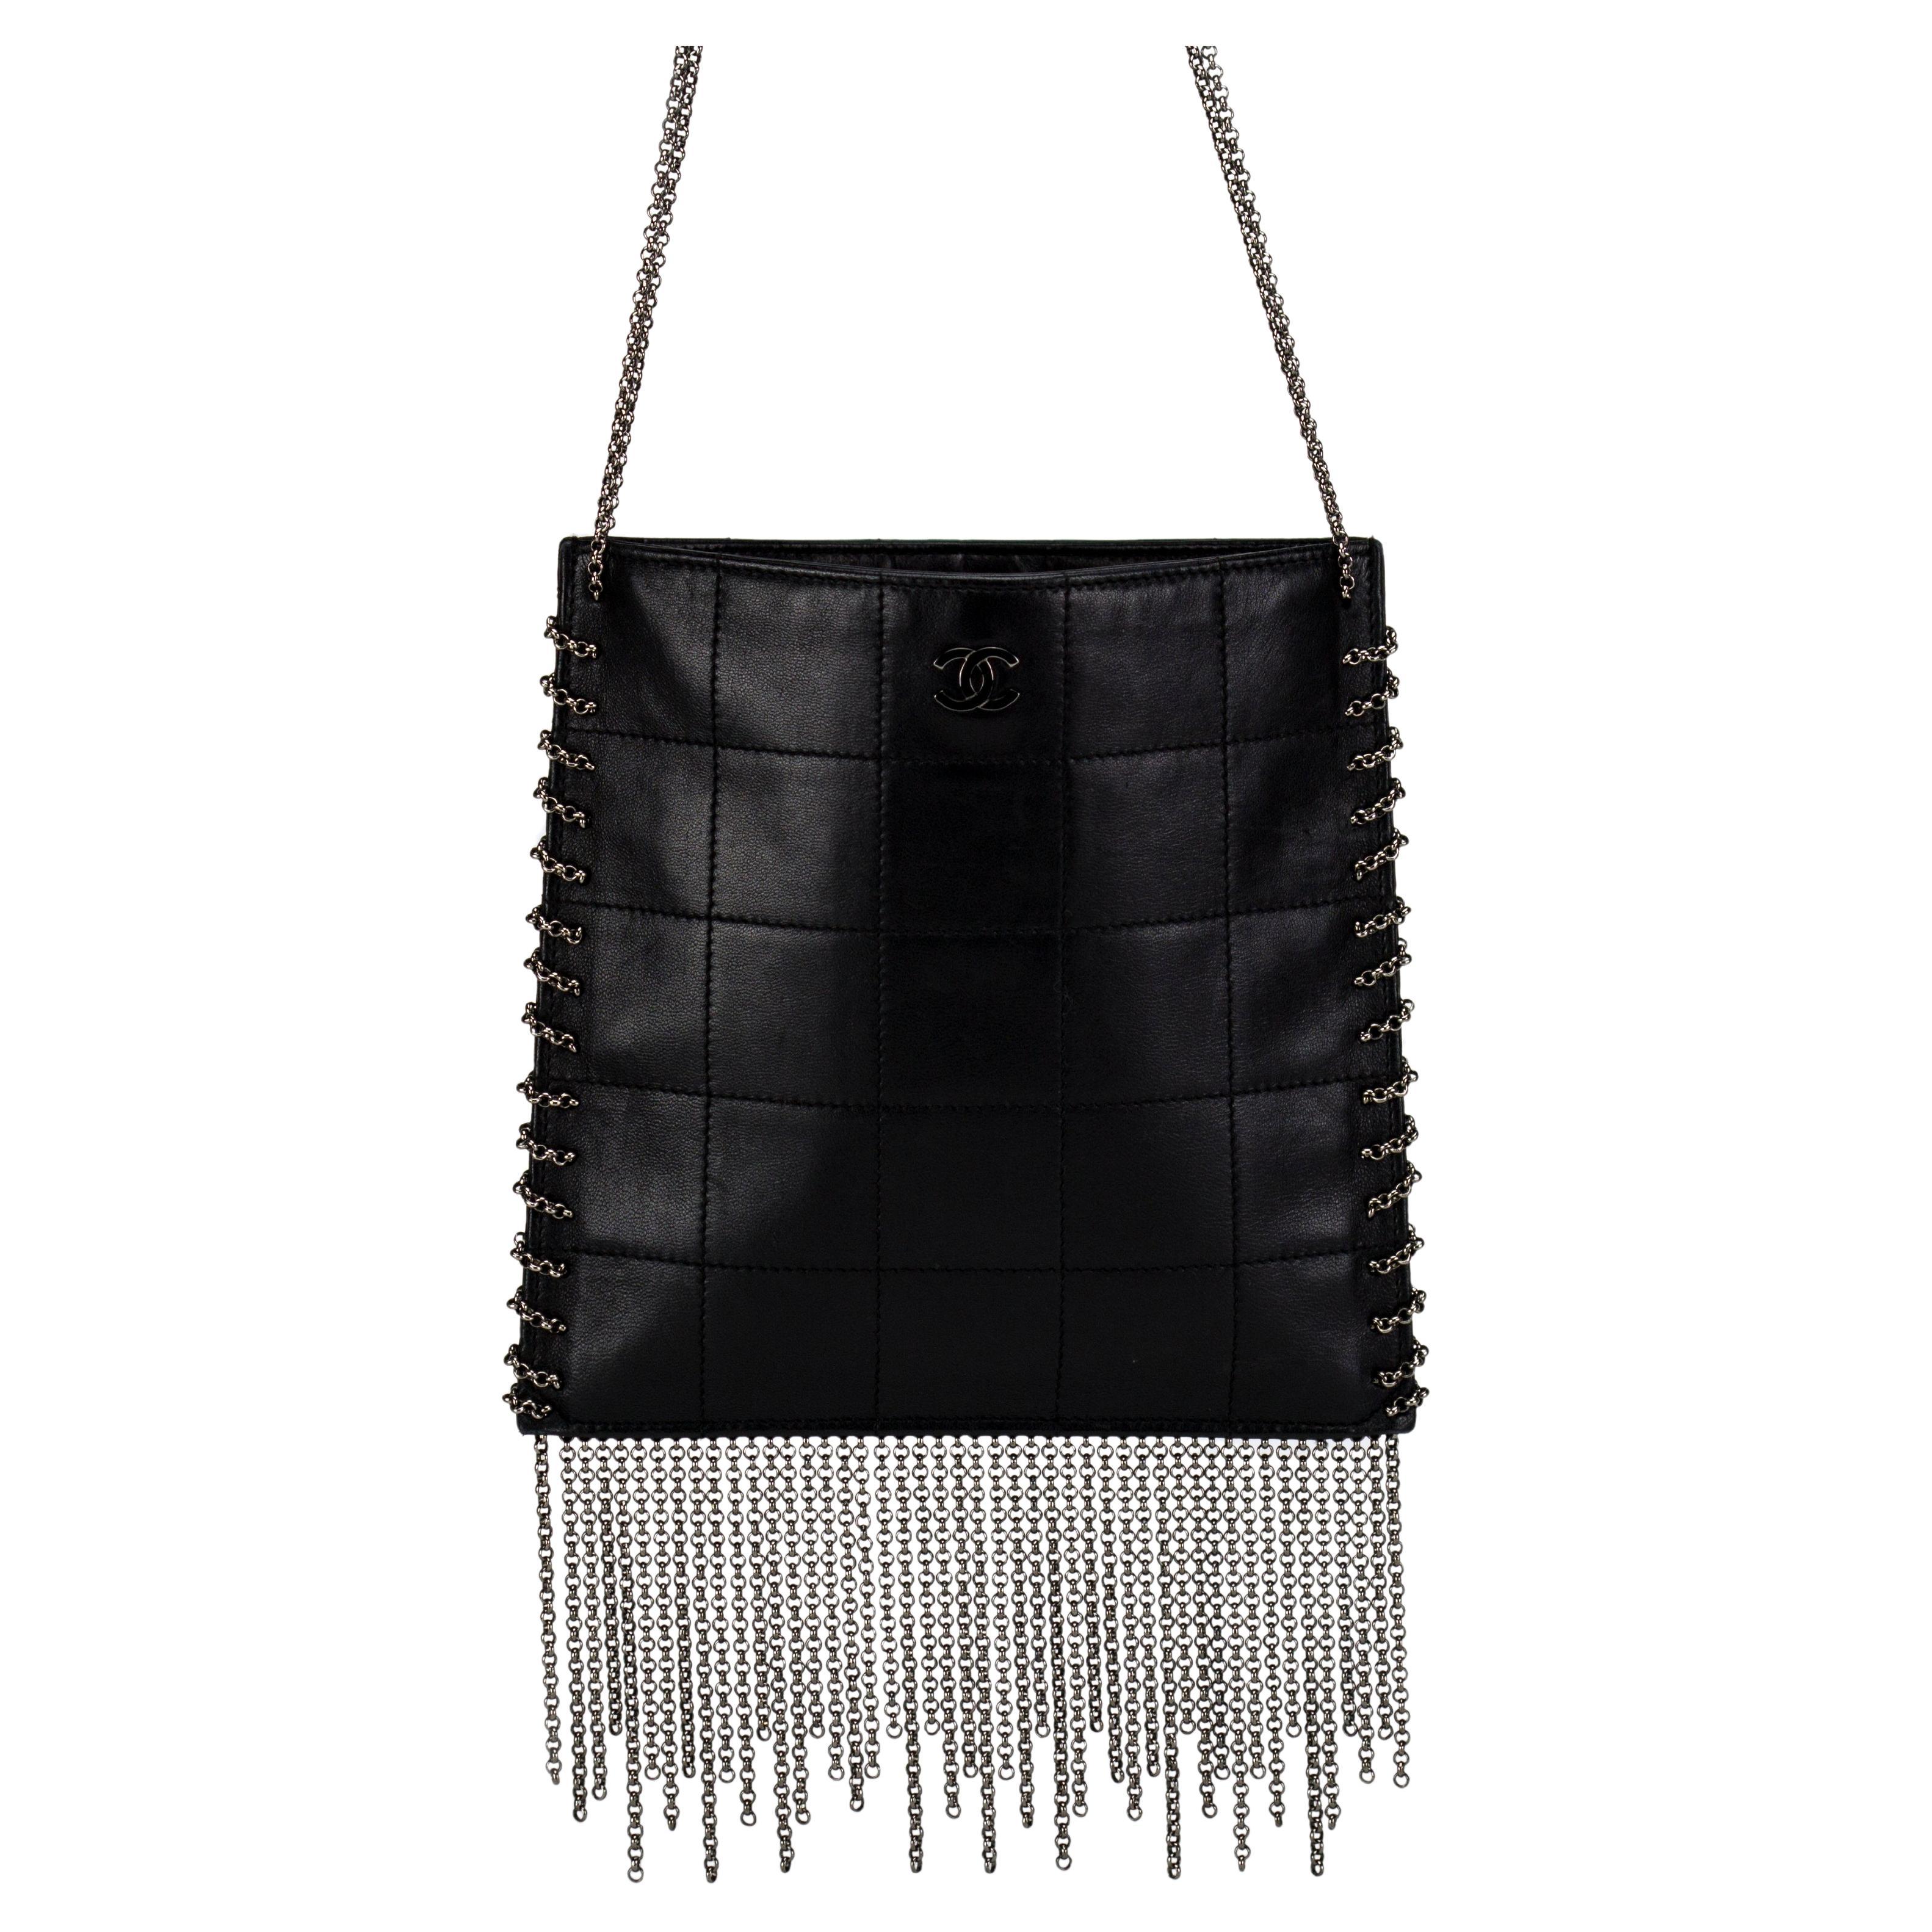 Chanel 2002 Vintage Edgy Punk Fringe Chain Quilted Mini Tote Crossbody Bag For Sale 5